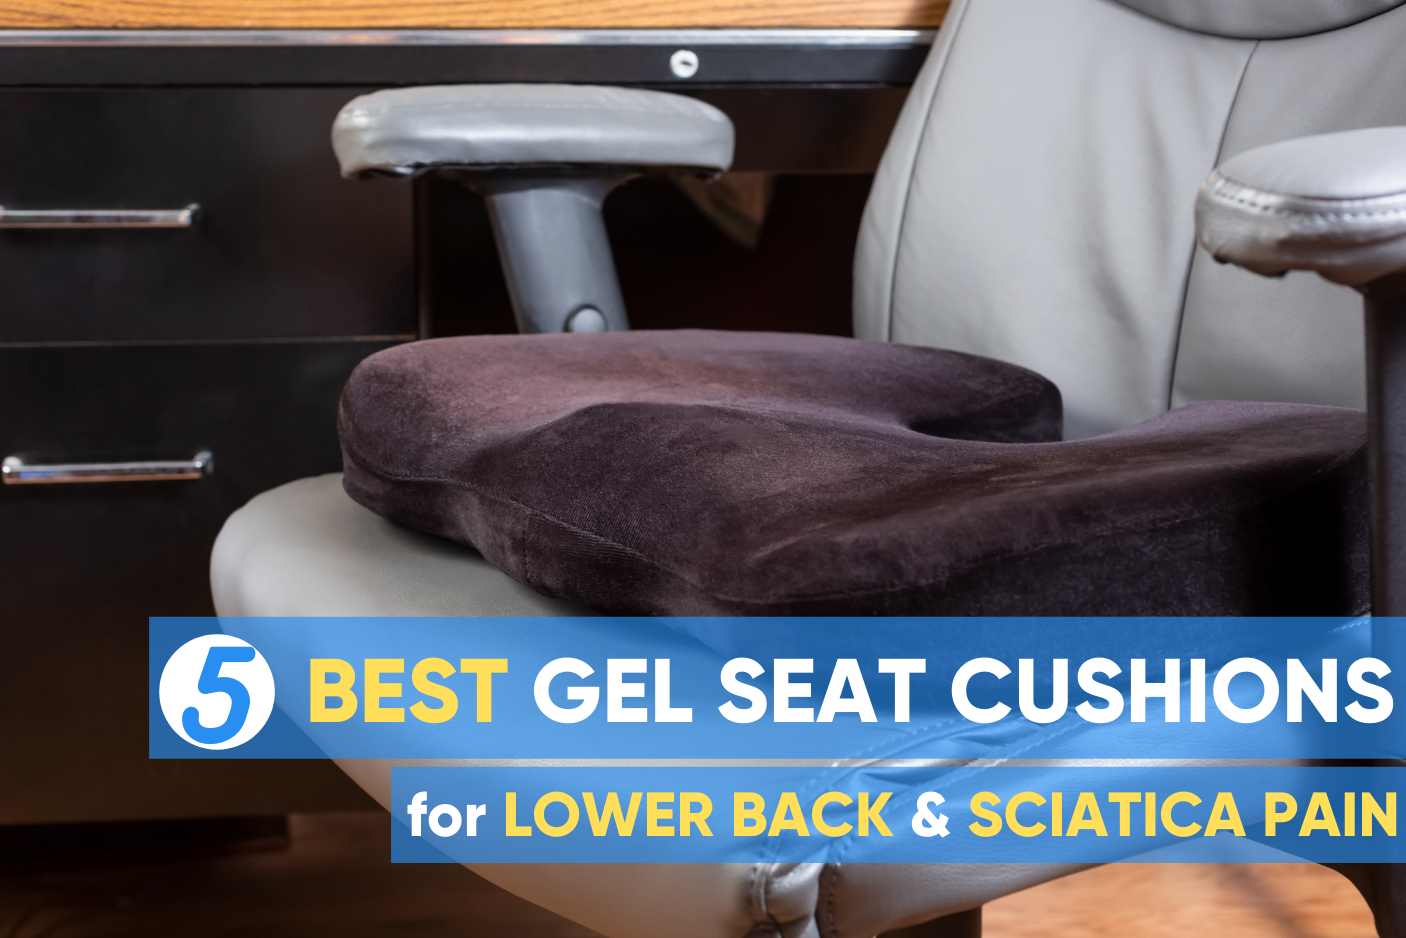 Sciatica Cushions - Do they actually help? Best one to buy? – Putnams